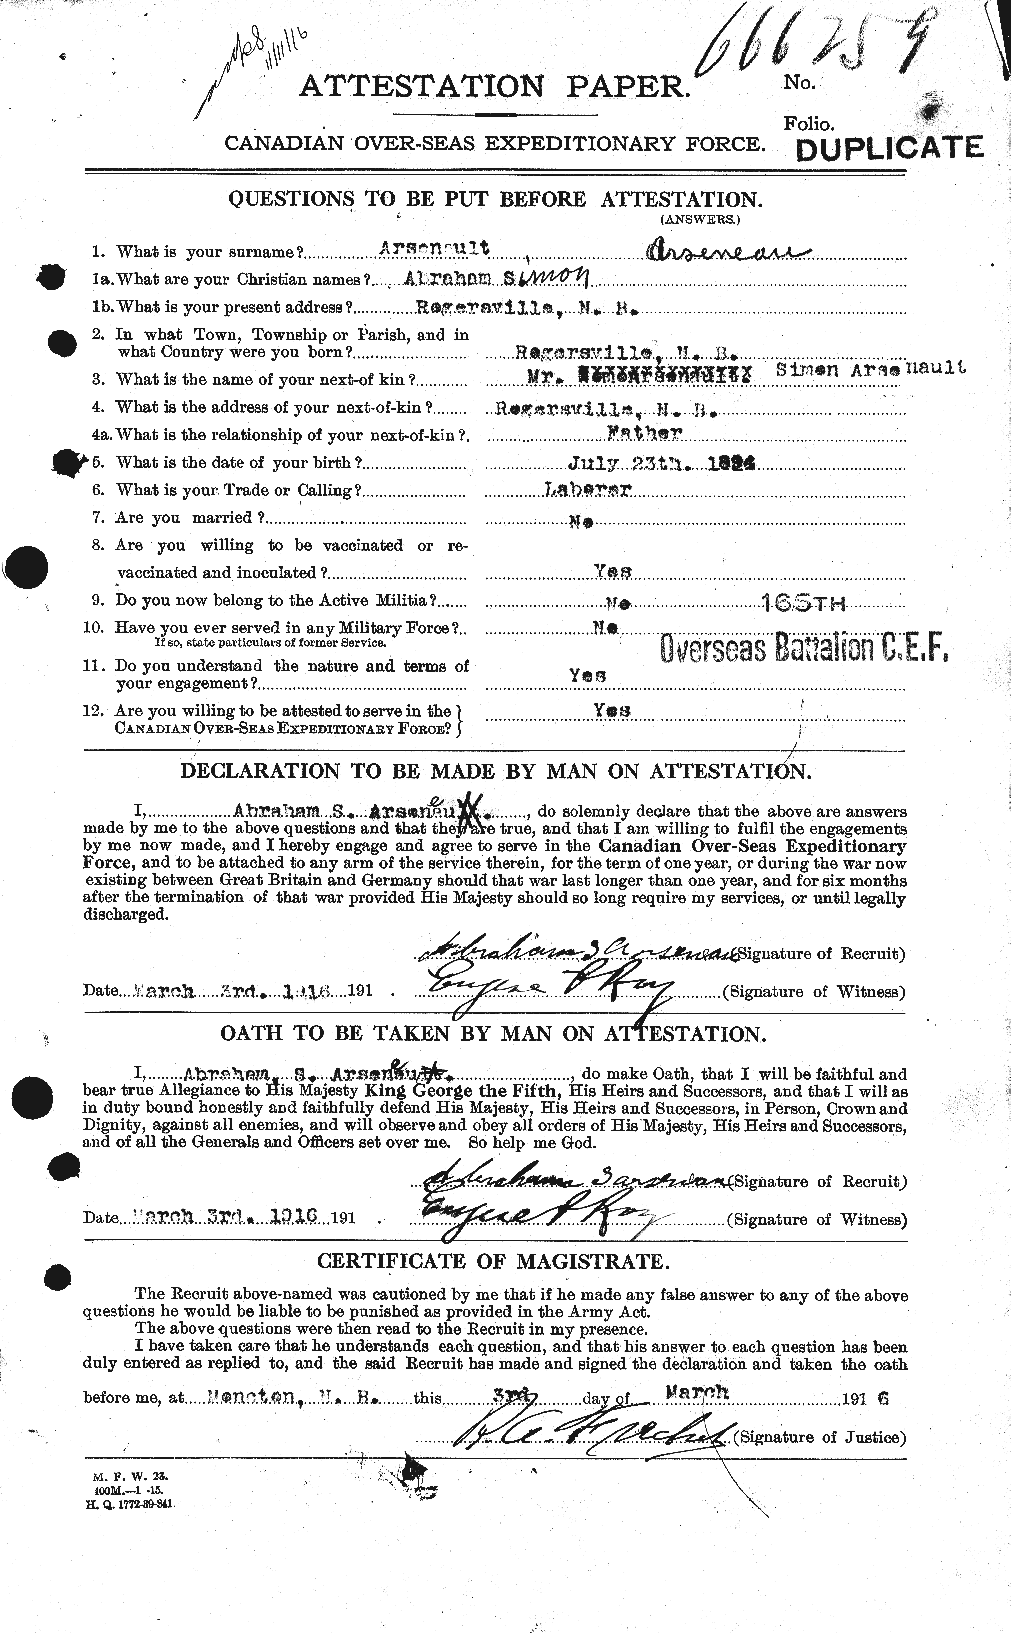 Personnel Records of the First World War - CEF 214258a